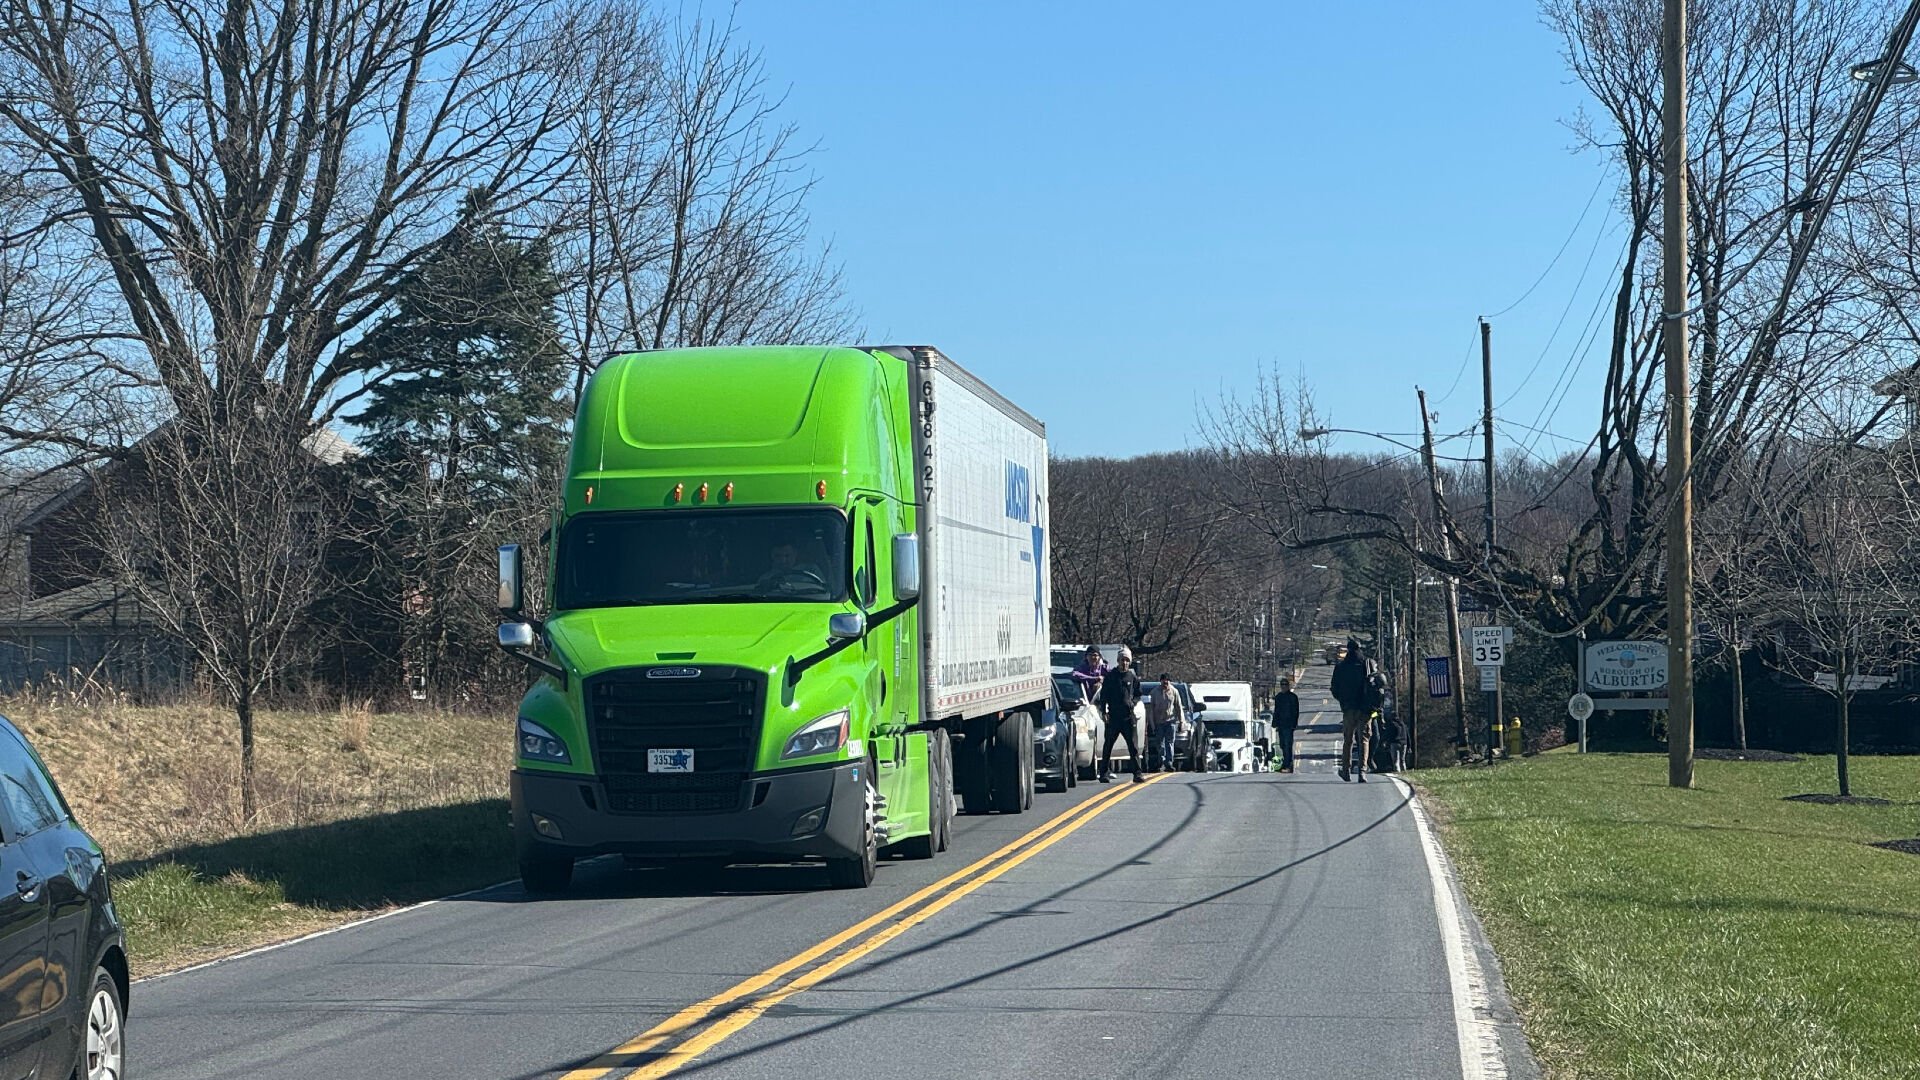 Suspicious package in Lower Macungie prompts business evacuation and road closures; Allentown Bomb Squad called in for assistance | Lehigh Valley Regional News